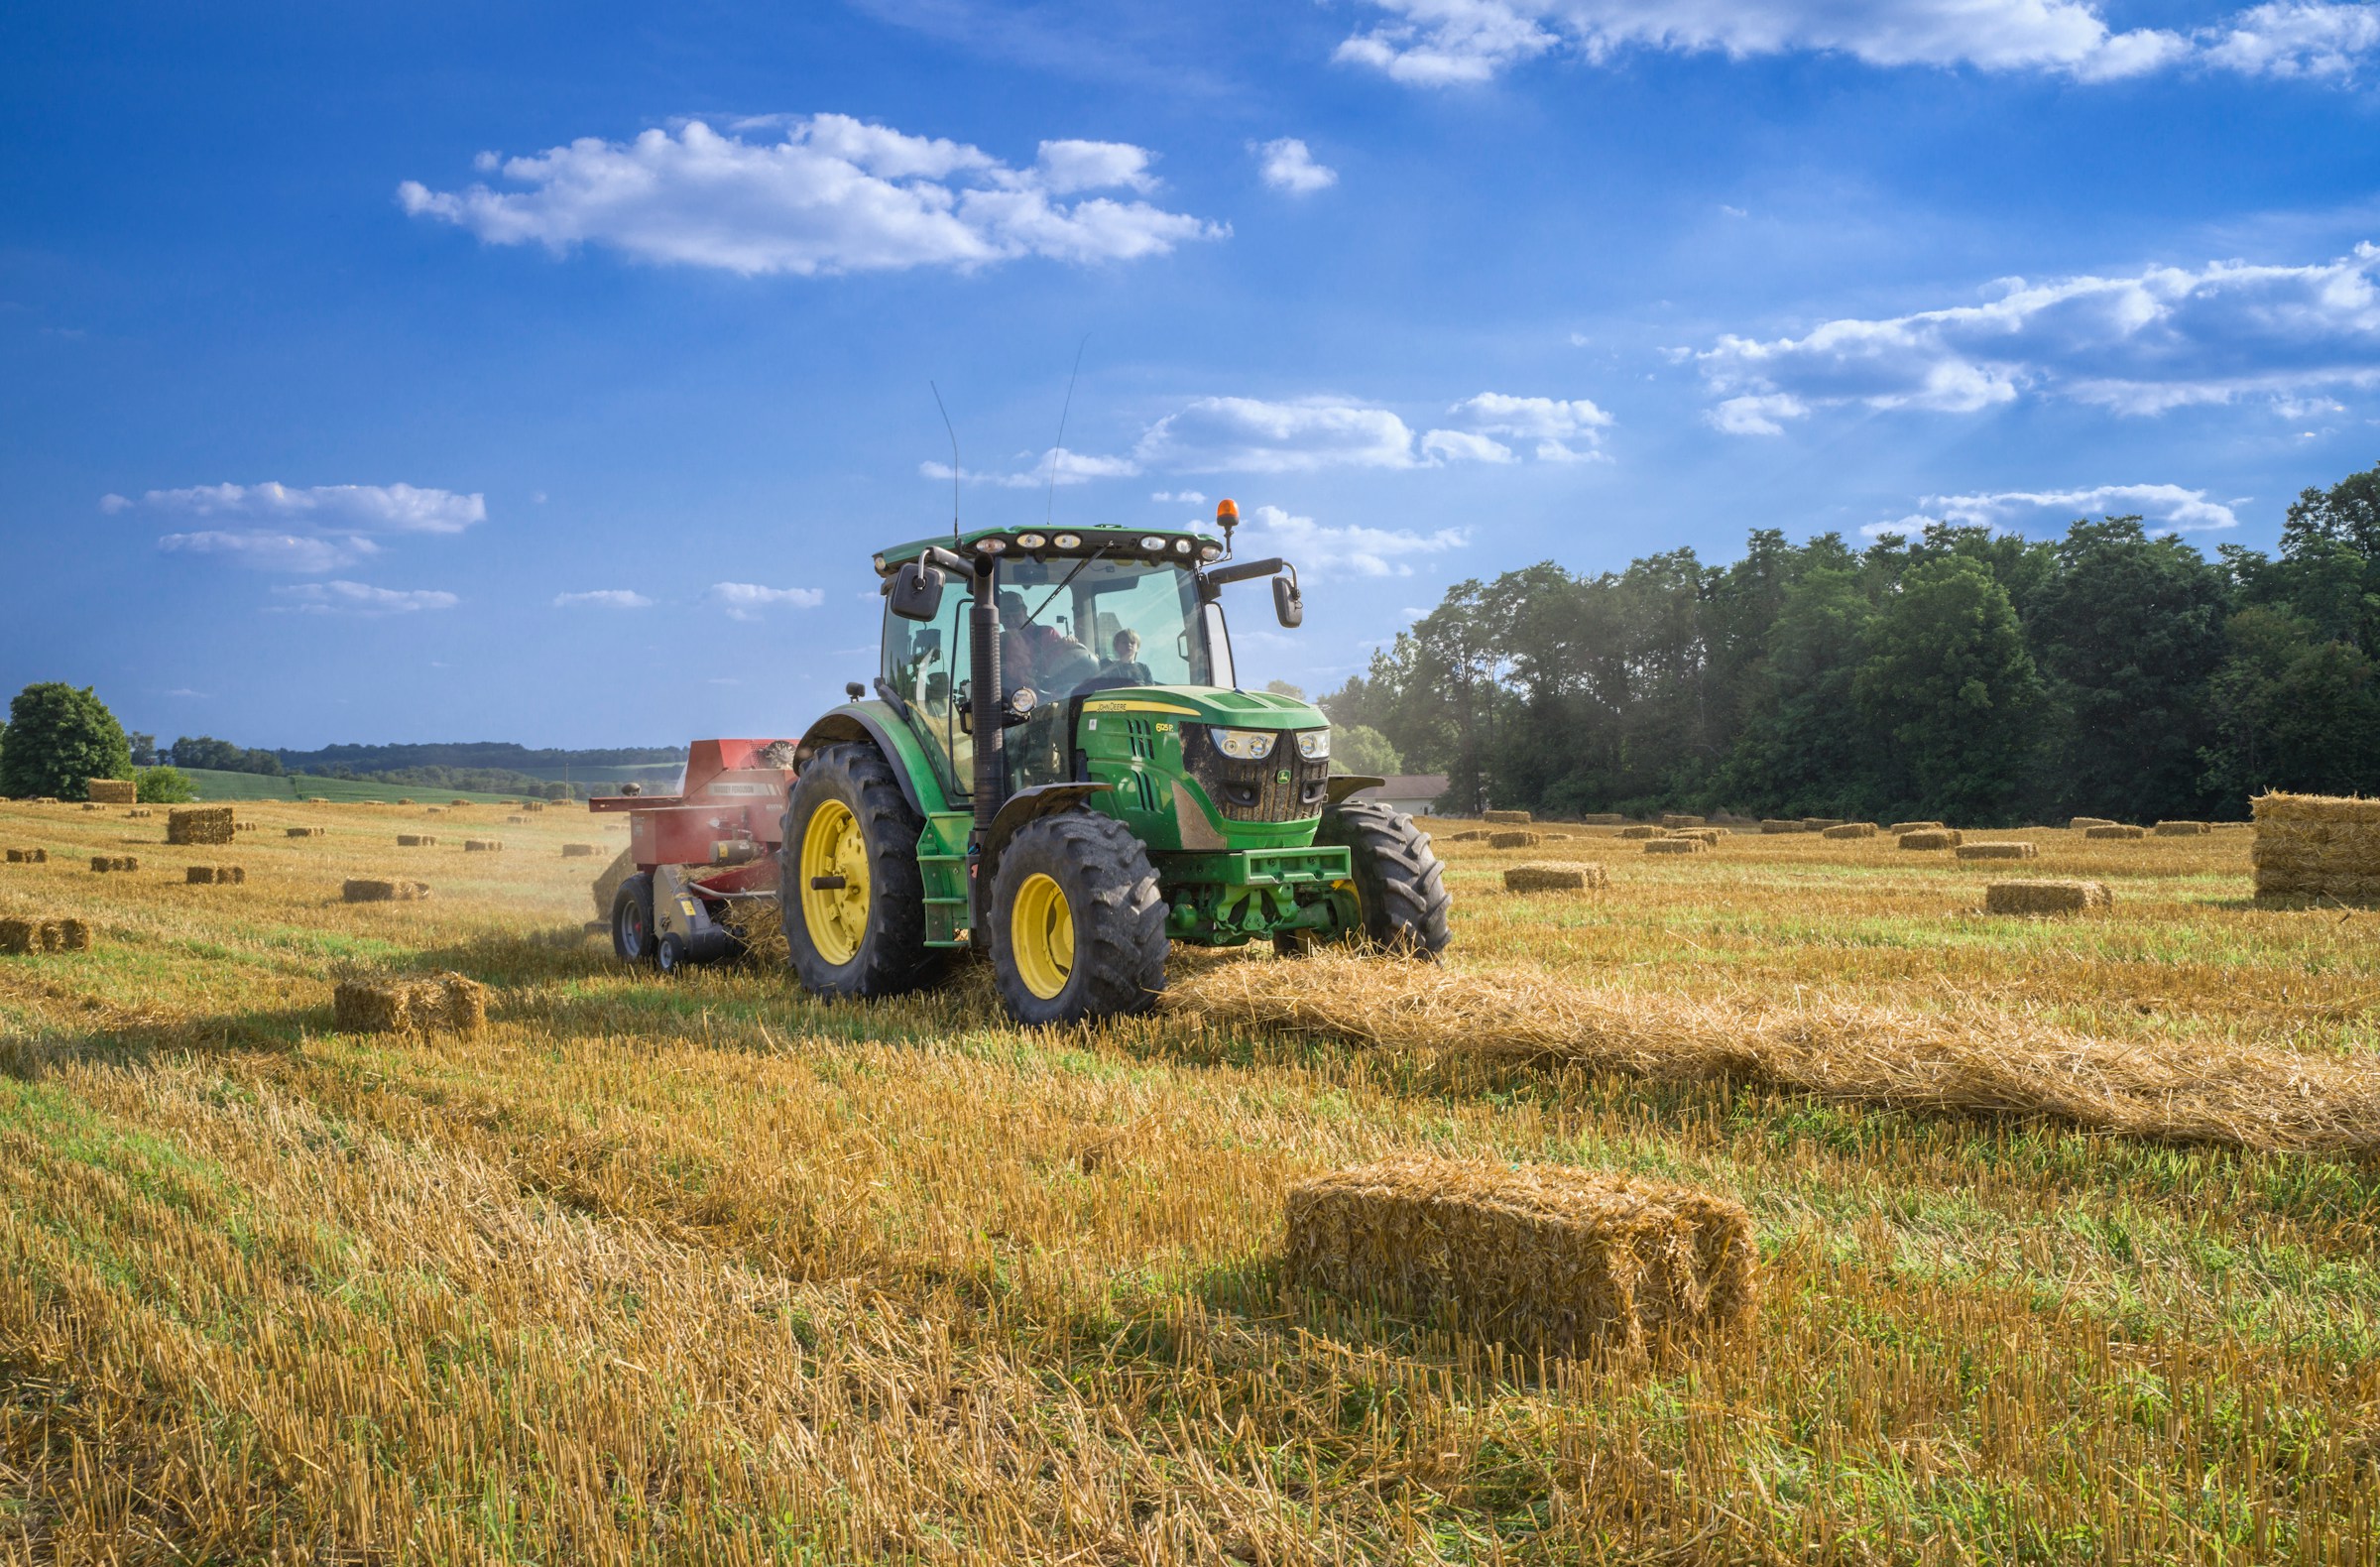 A green tractor harvesting hay for the agriculture industry.